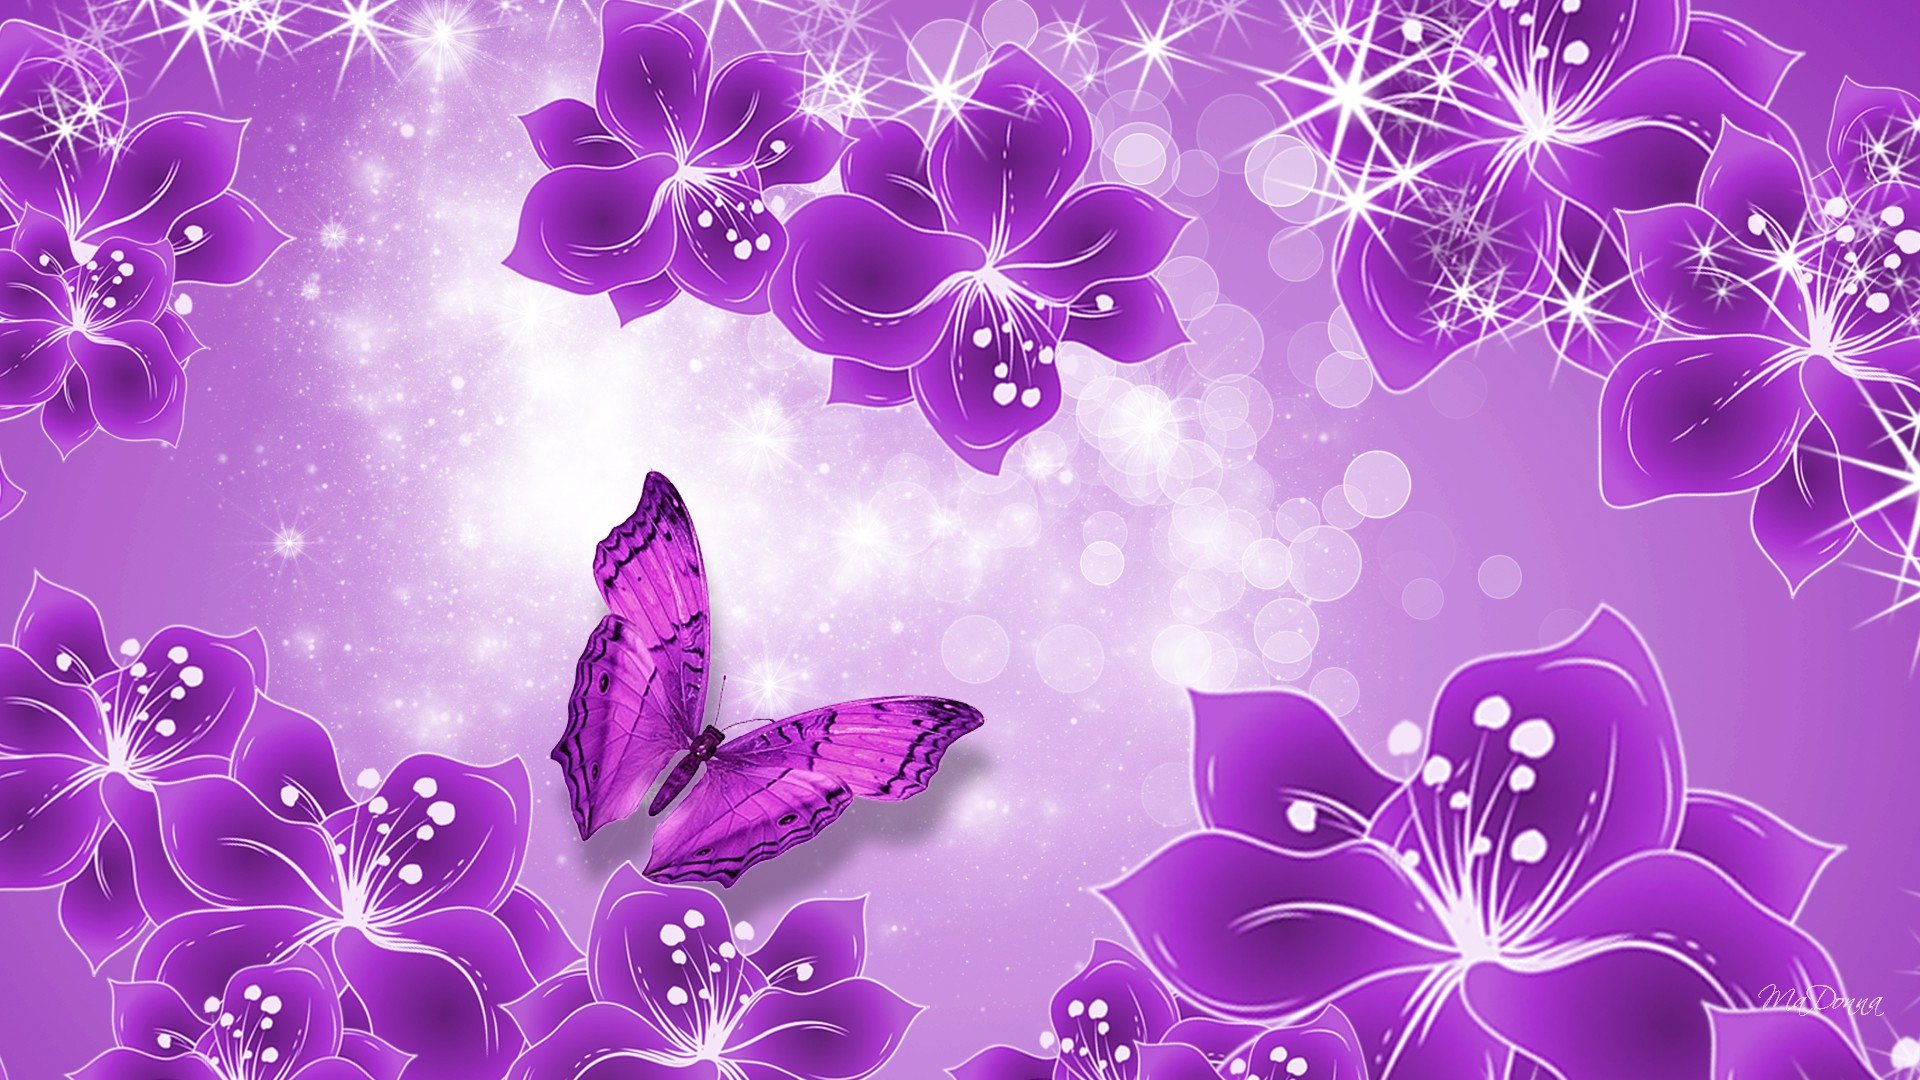 43 HD Purple WallpaperBackground Images To Download For Free